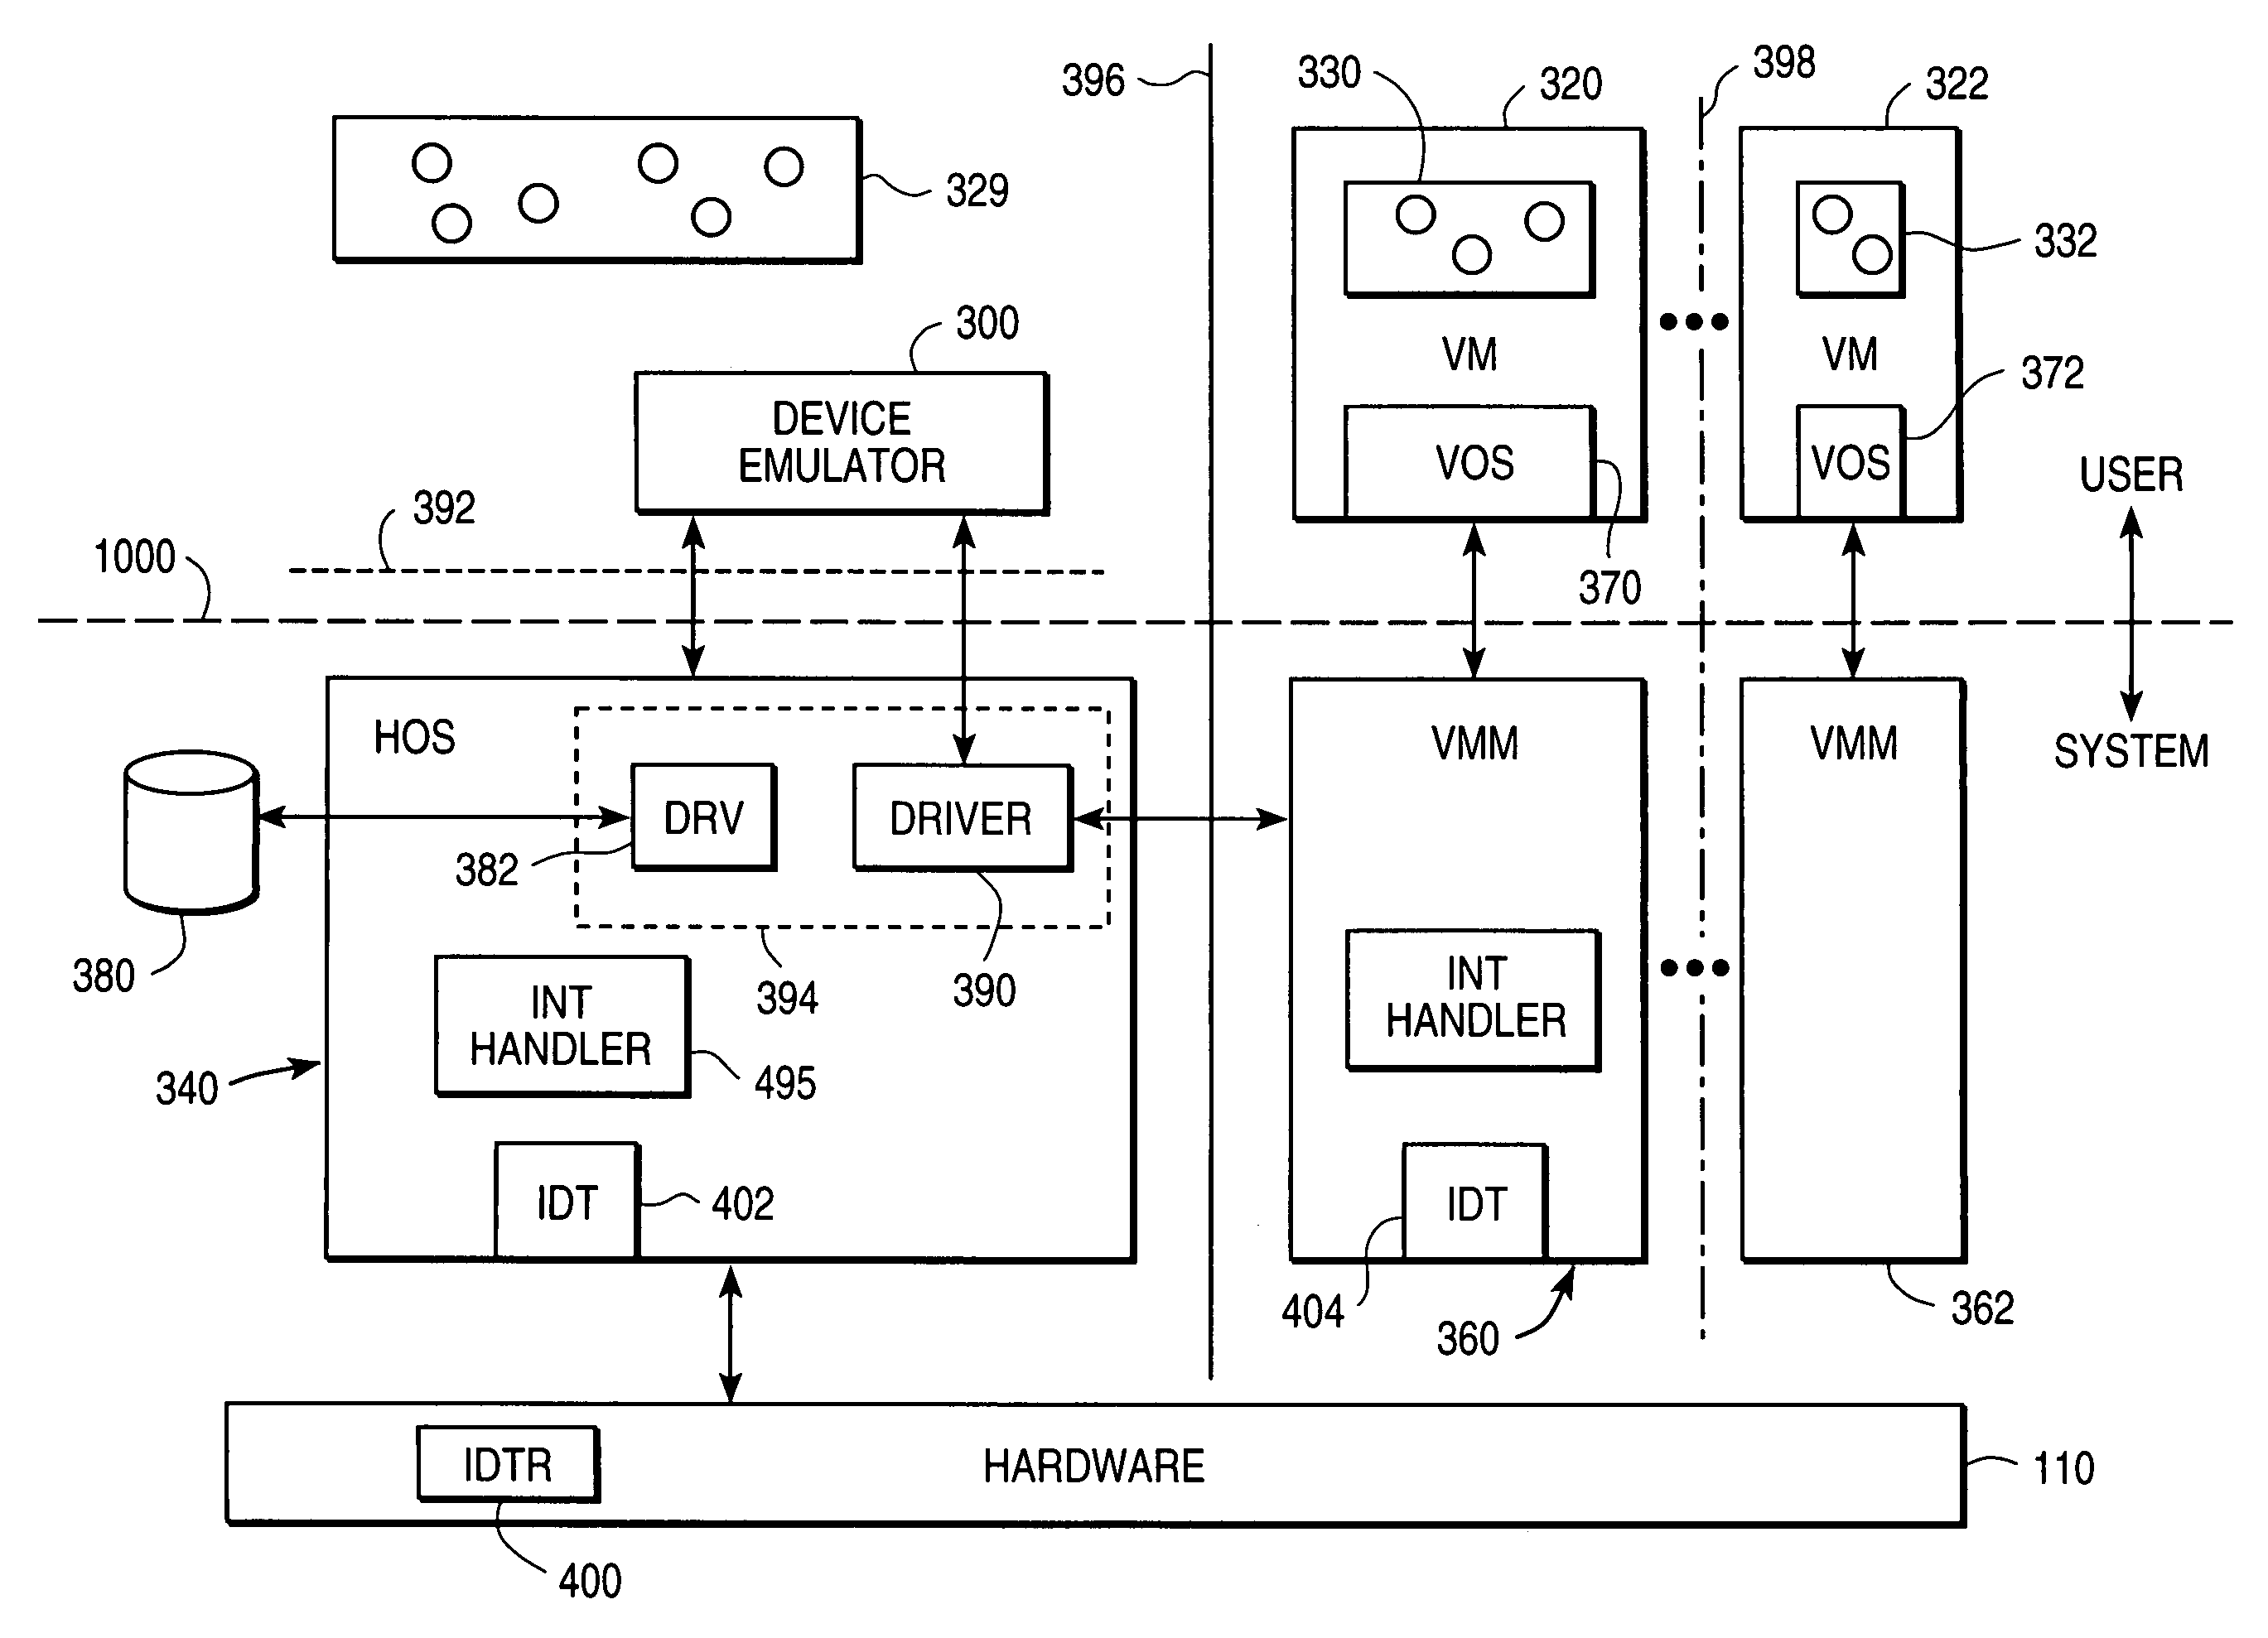 System and method for facilitating context-switching in a multi-context computer system